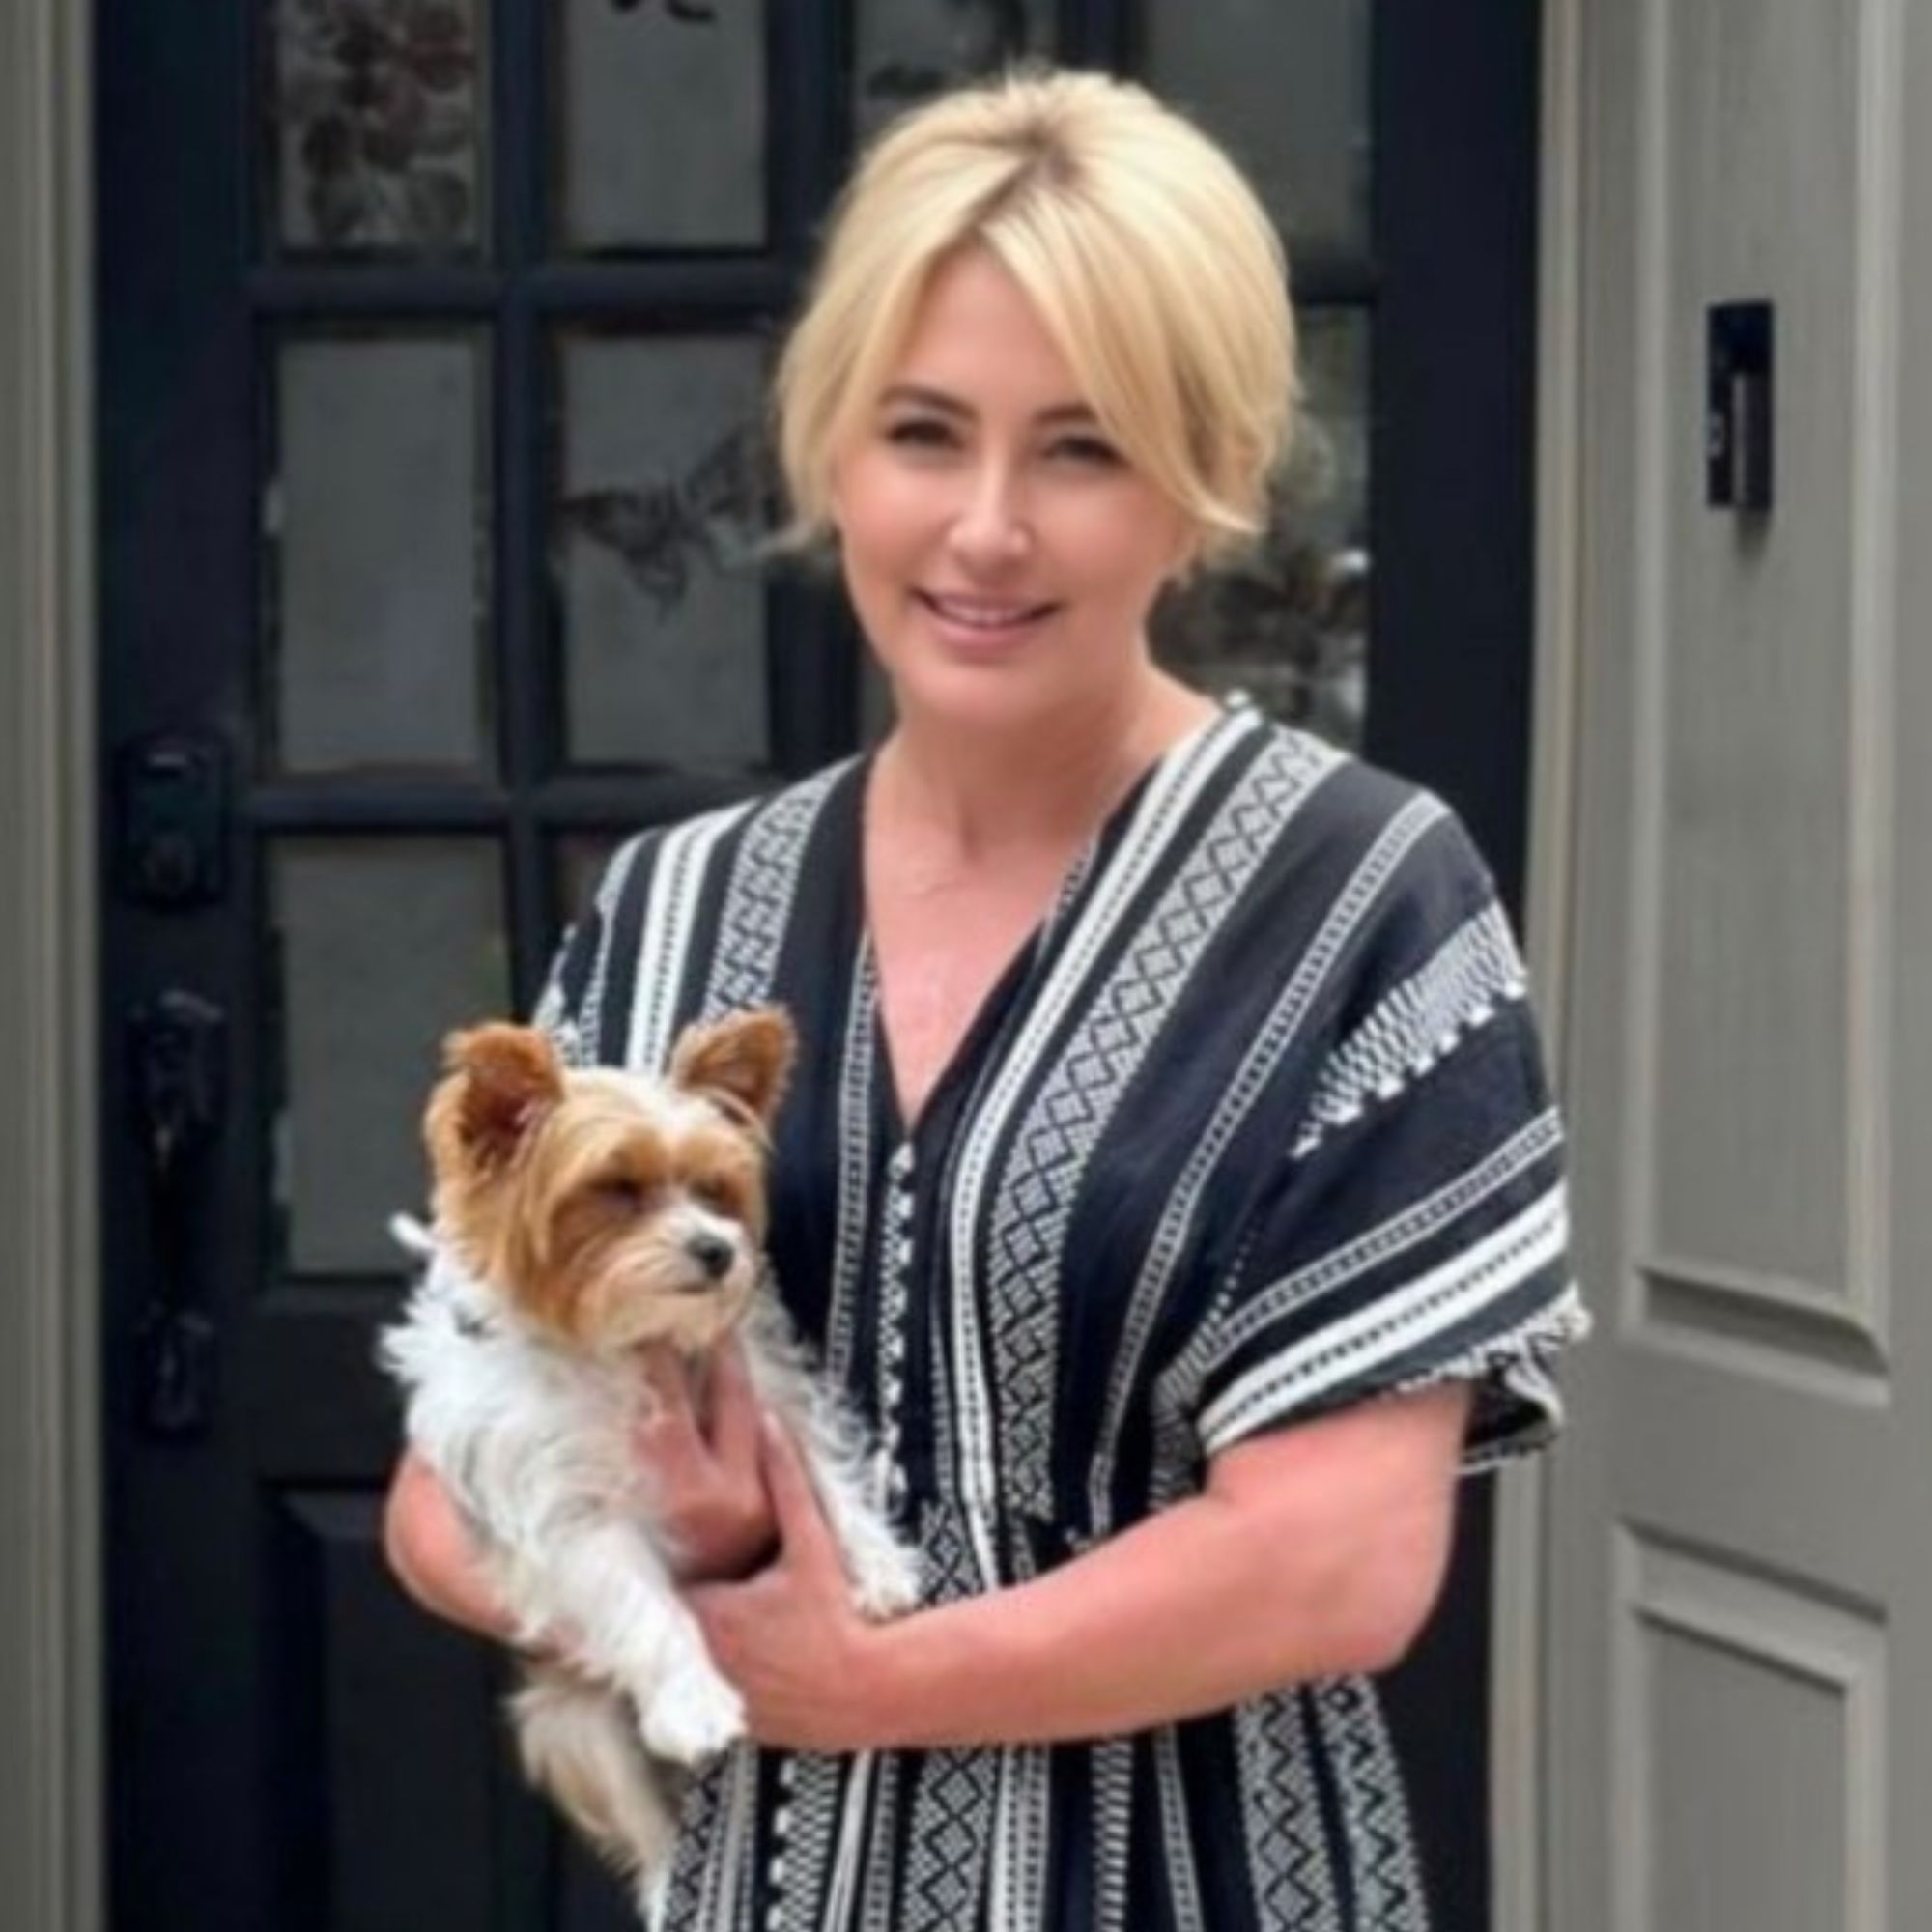 A picture of Kim Riley, a woman with tied back blonde hair wearing a striped blue, gray and white dress holding a brown and white dog, standing in front of a black door with glass rectangular panels